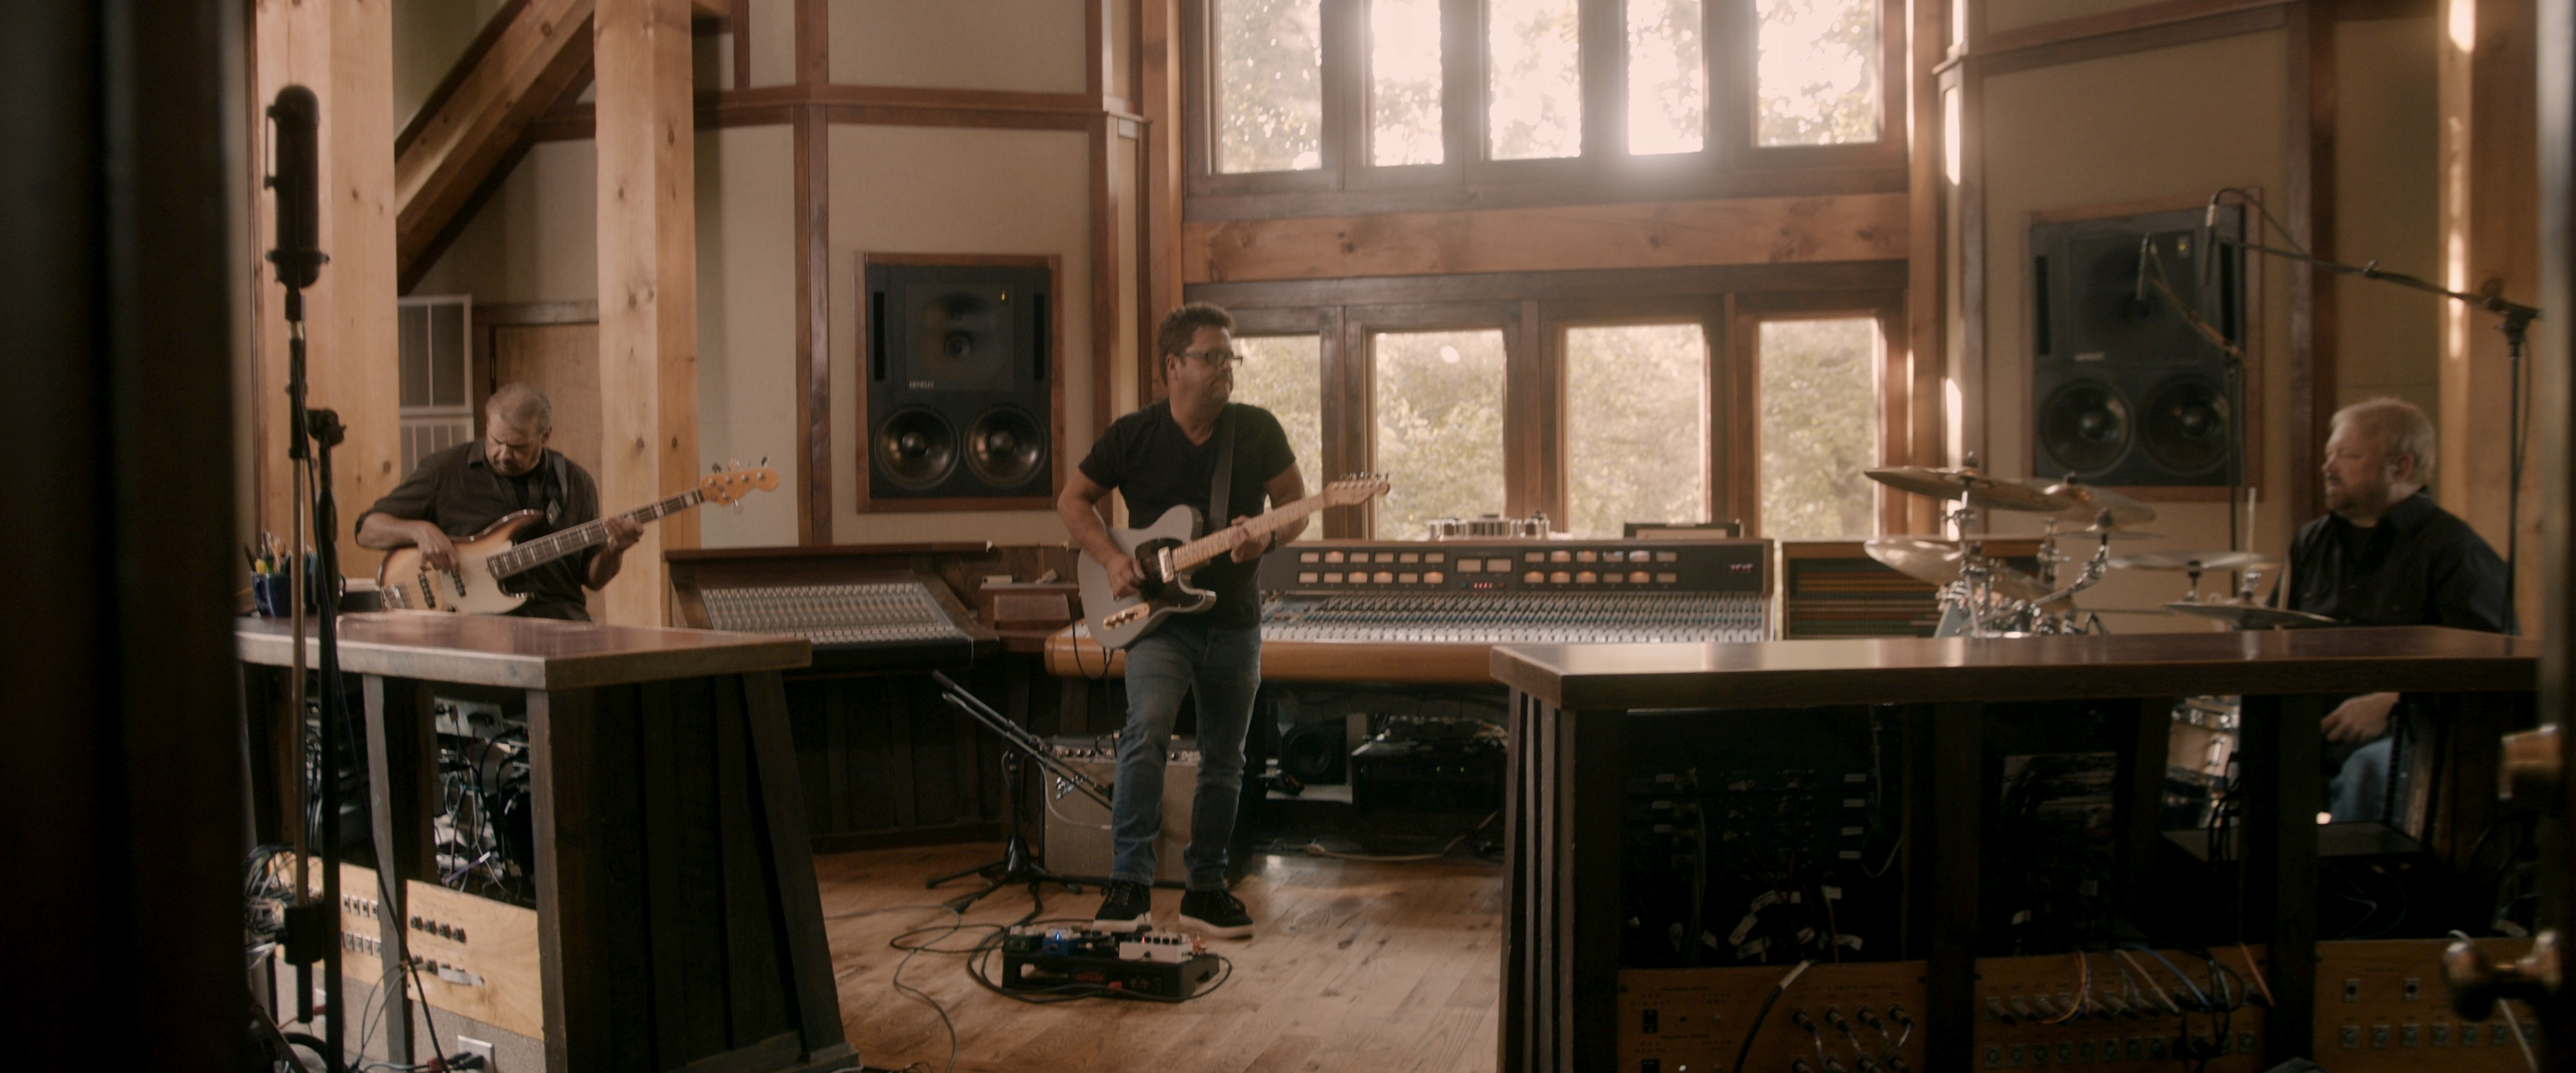 Watch Brent Mason Shred On His New Signature Fender Telecaster